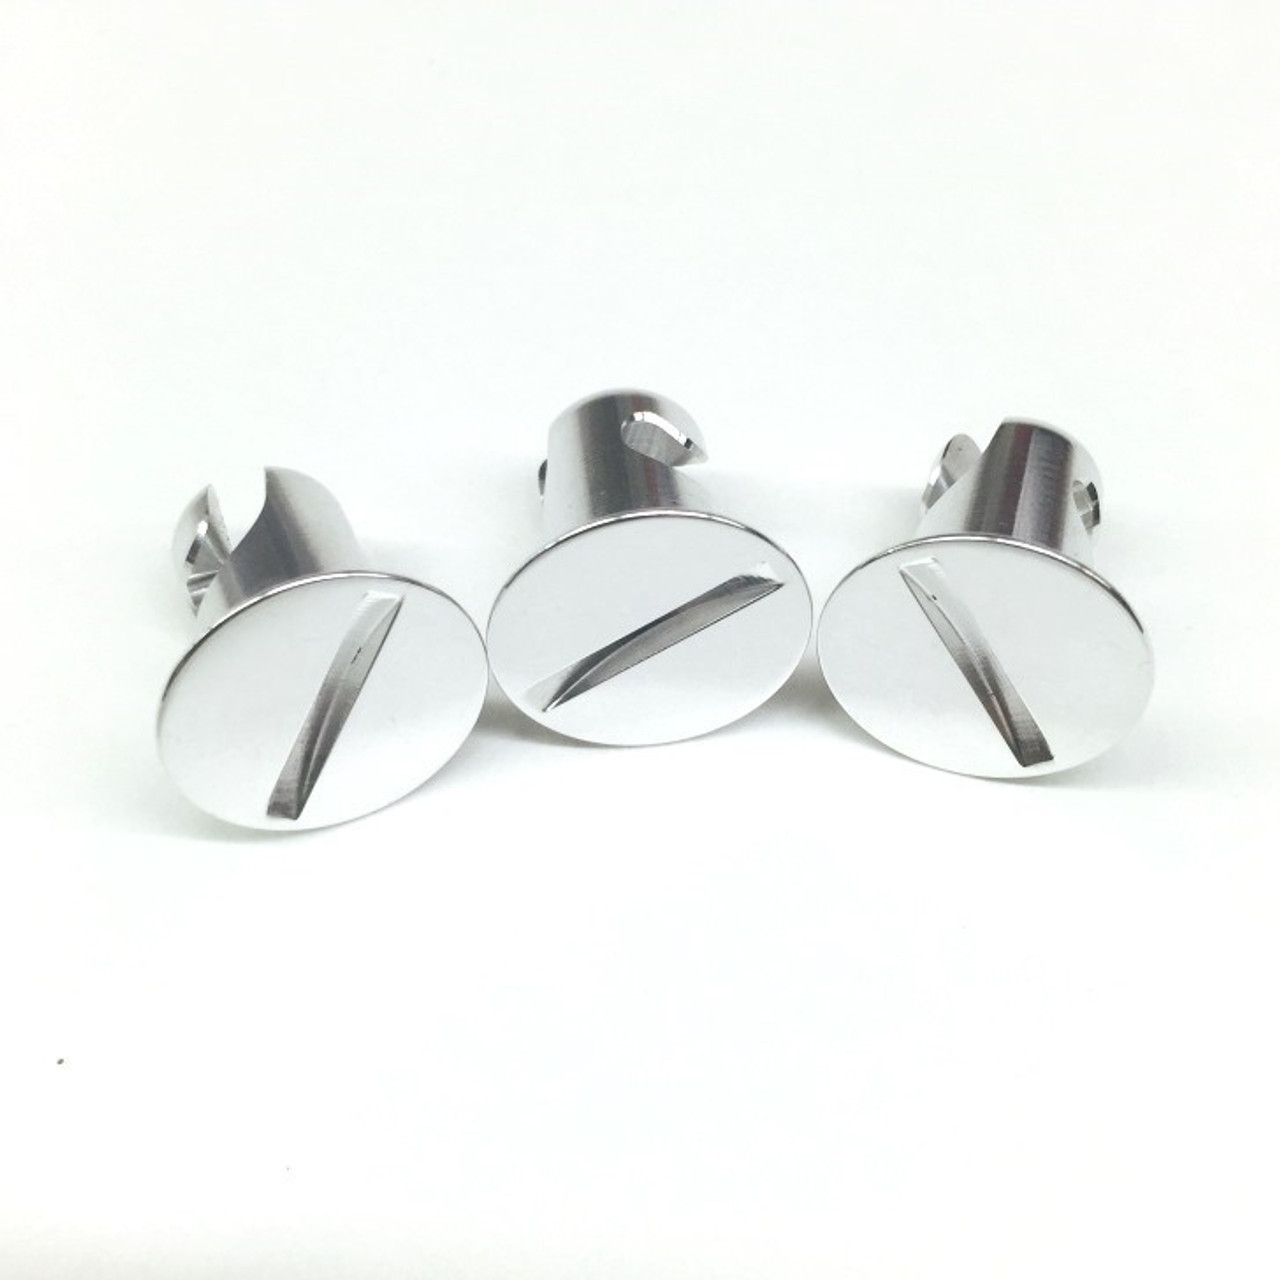 .650 long polished slotted flat head quarter turn DZUS button fasteners